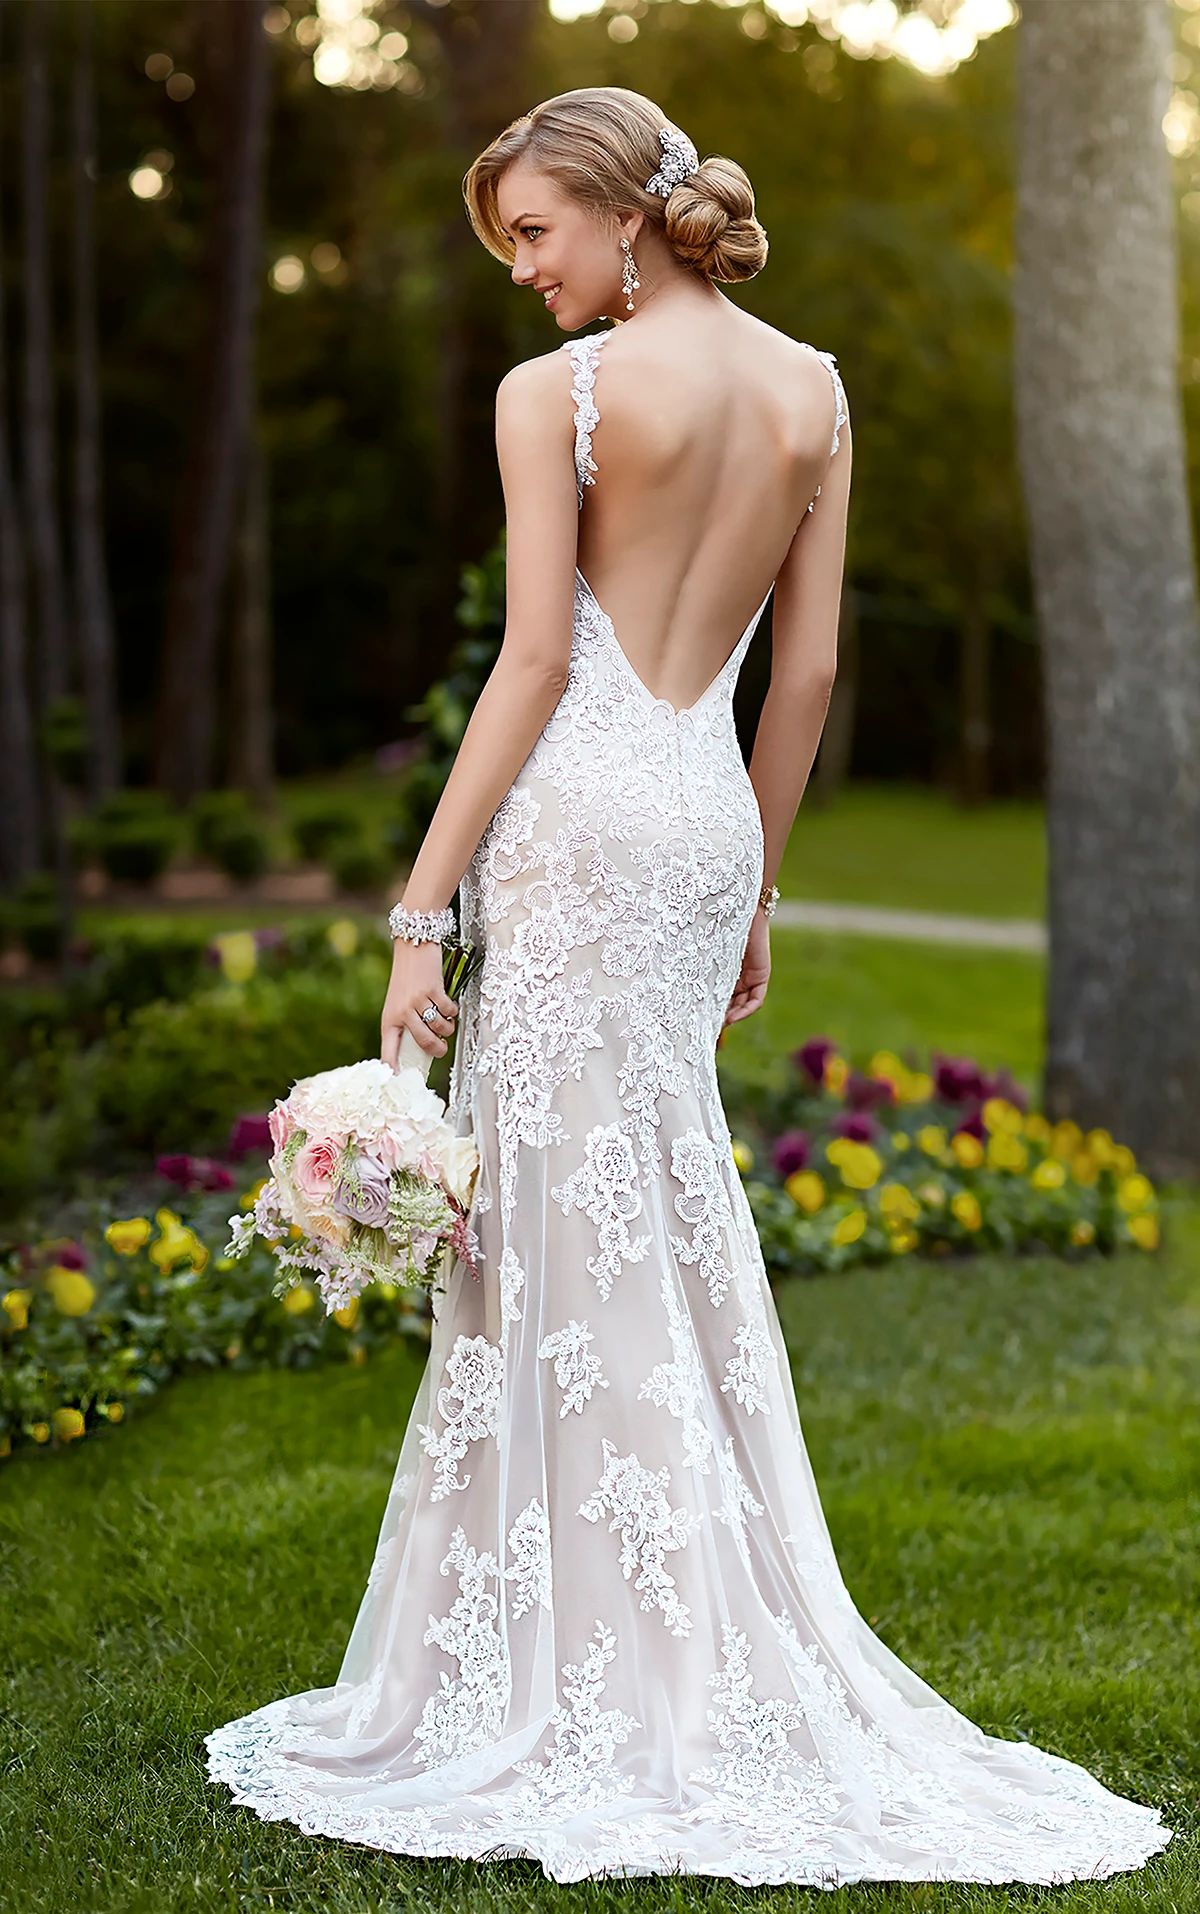 Backless Wedding Dresses Vneck Wedding Gown with Open